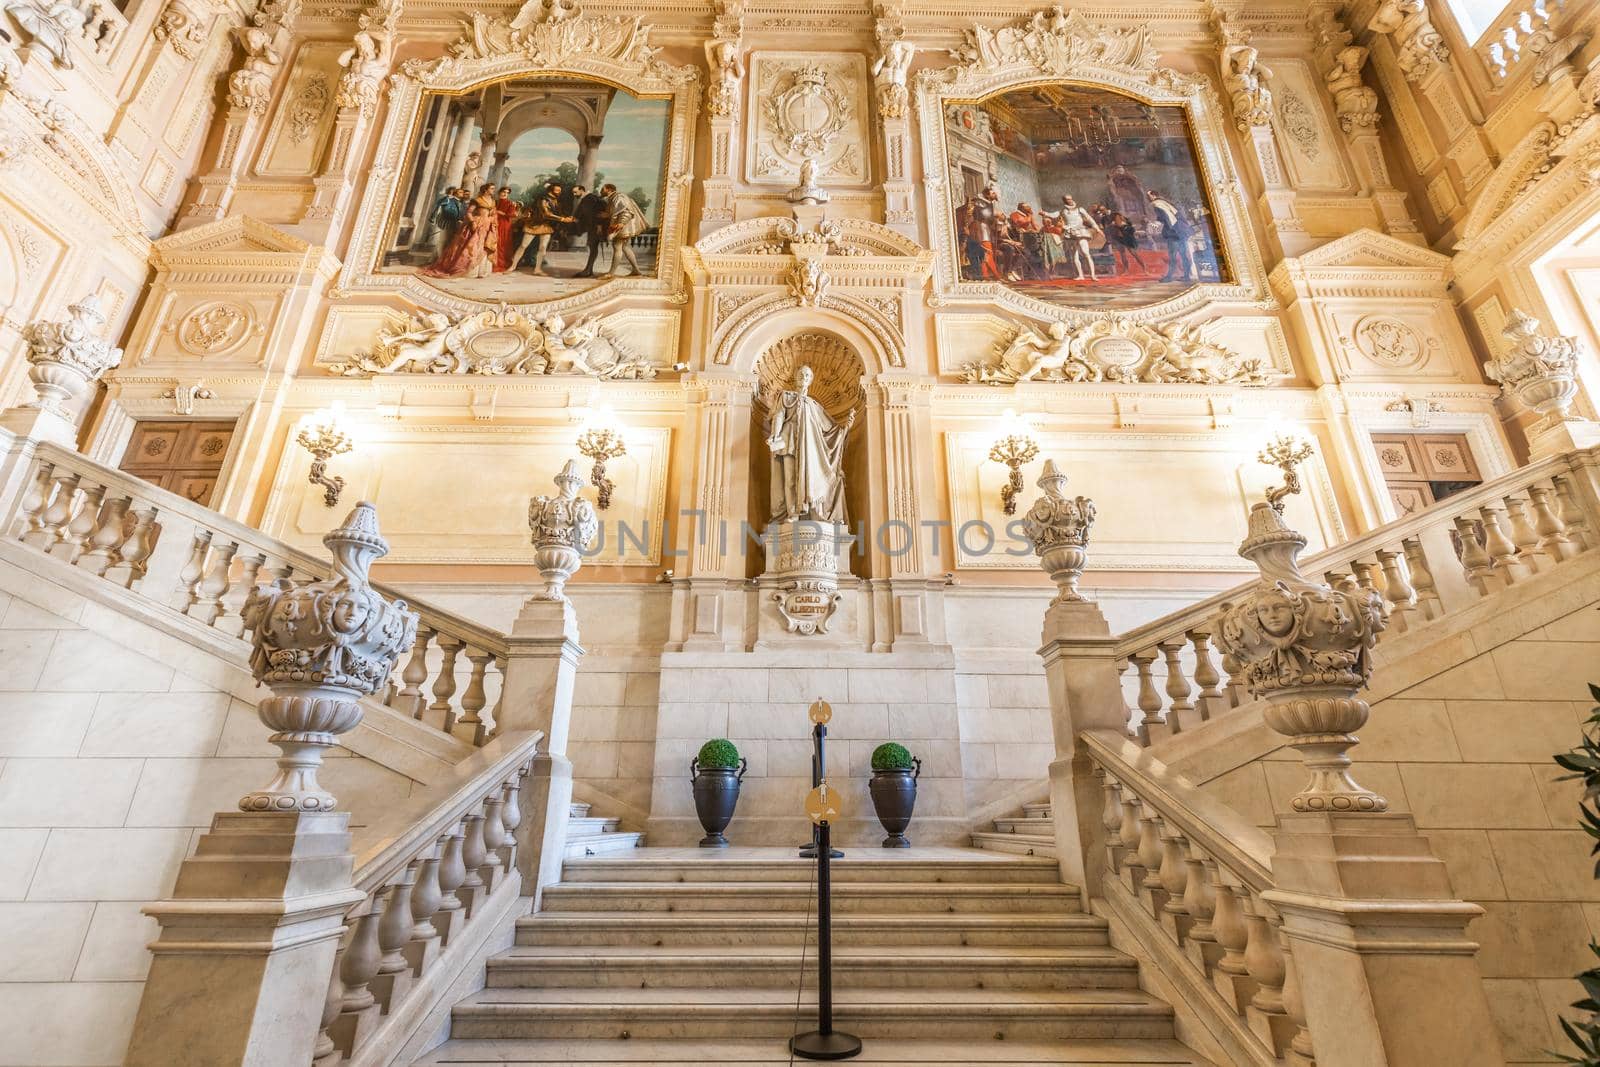 Turin, Italy - Circa August 2021: marble staircase in historic palace with luxury interior - Savoia Royal Palace